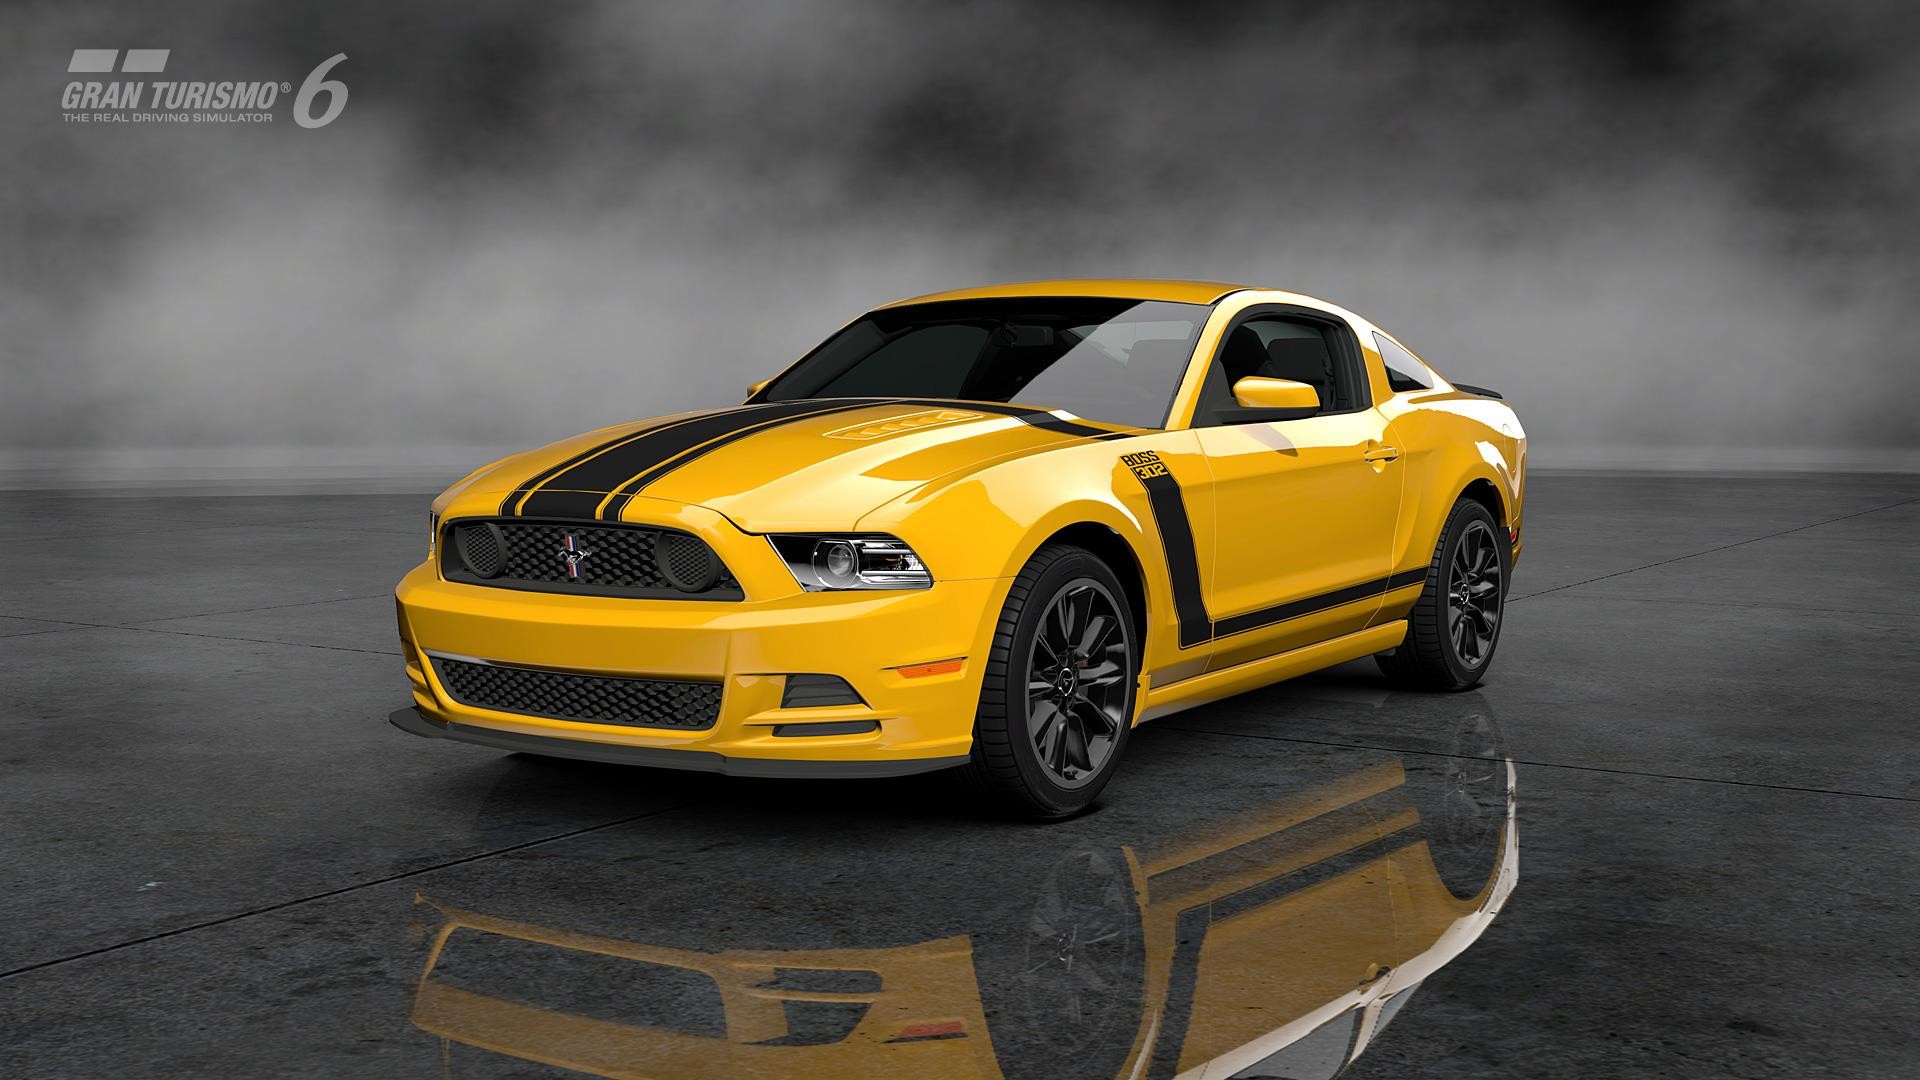 General 1920x1080 Ford Mustang Gran Turismo 6 car video games vehicle mist reflection Ford Ford Mustang S-197 II